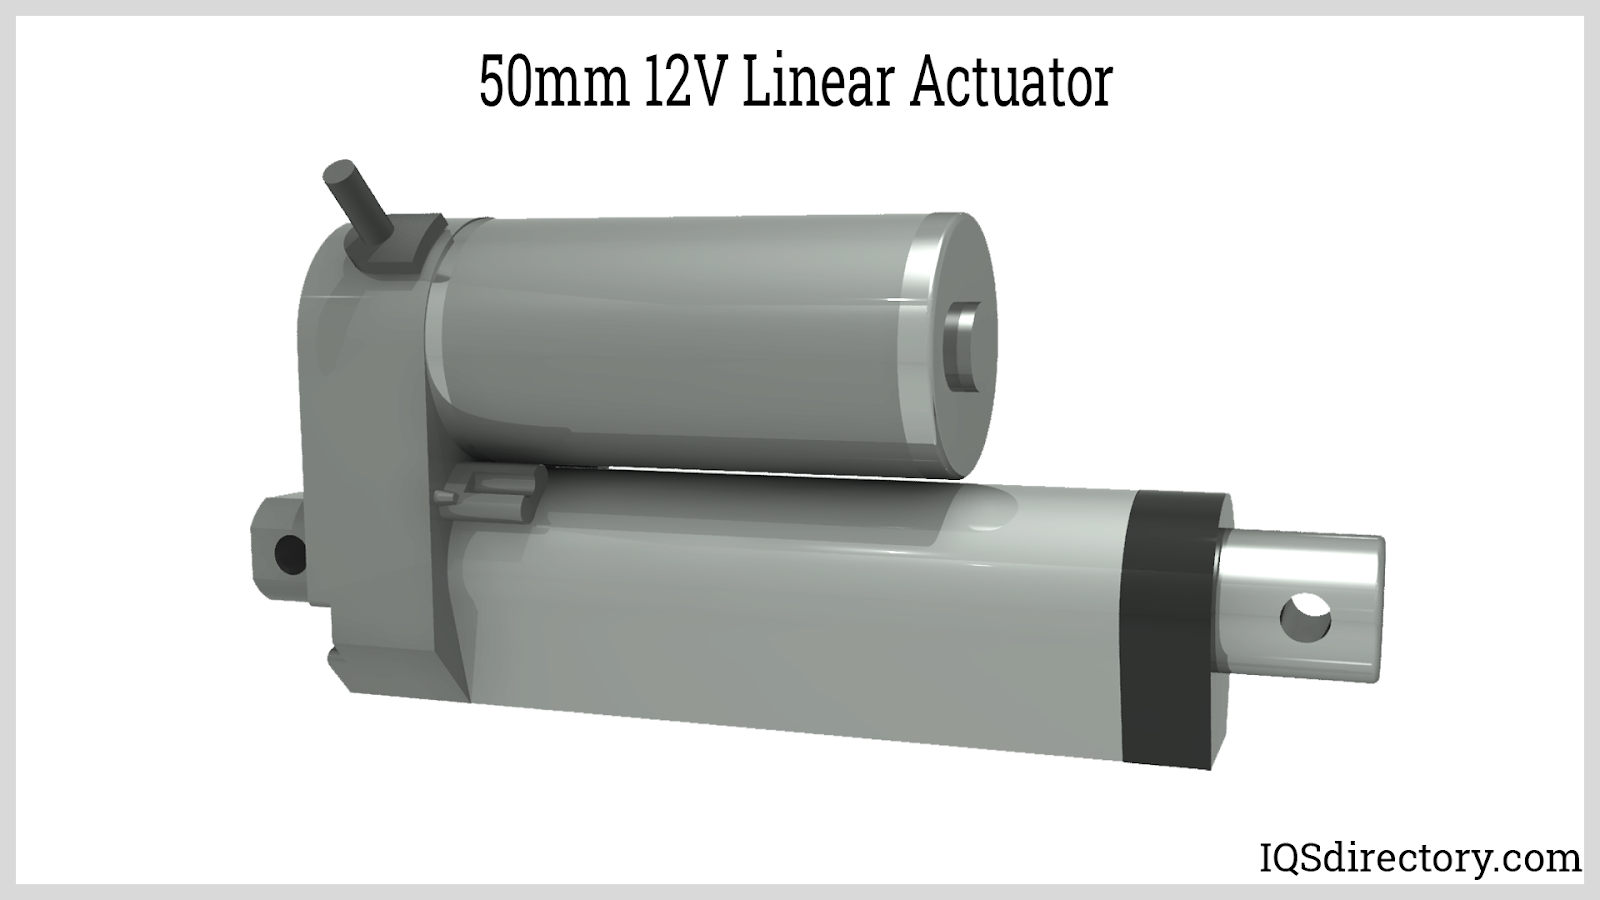 50mm 12V Linear Actuator